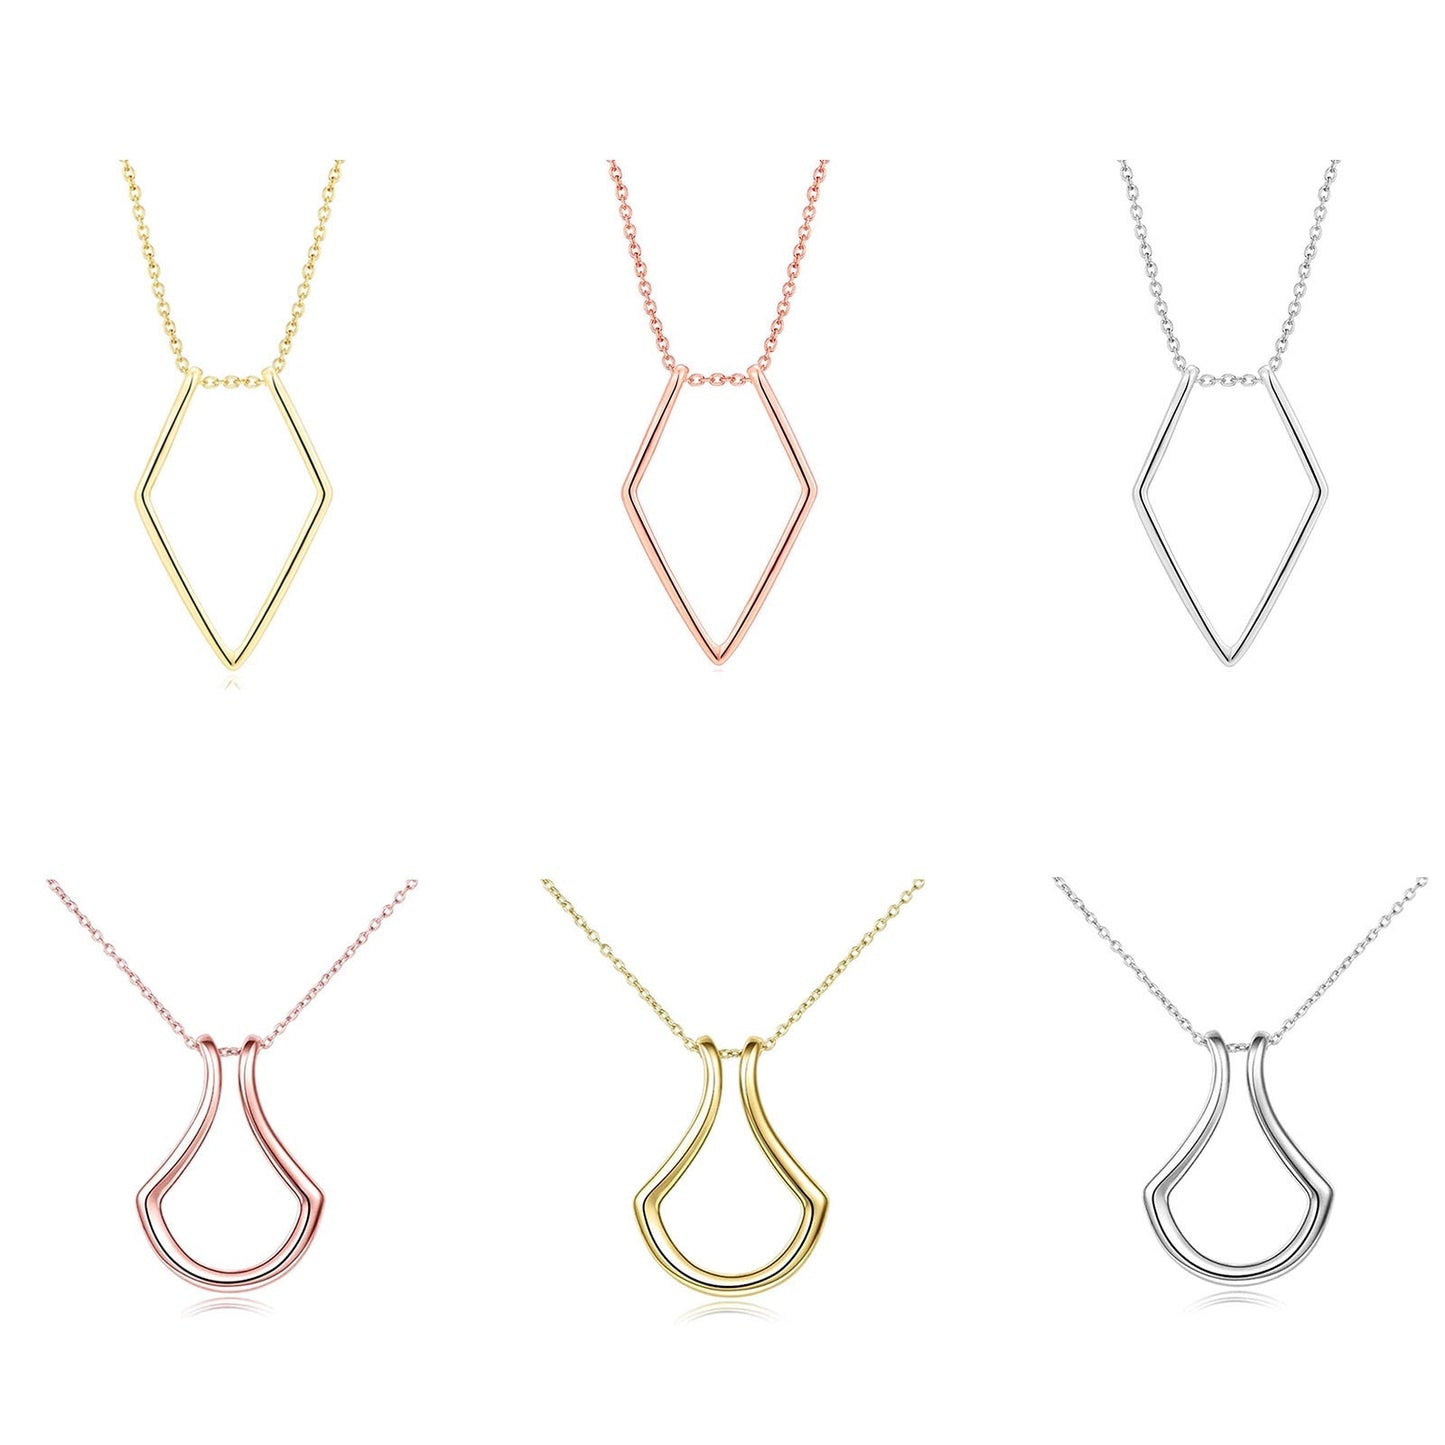 1Piece Fashion Necklace Geometric Simple Ring Holder Ring Pendant Necklace for Men Women Party Jewelry Neck Chain 45cm long